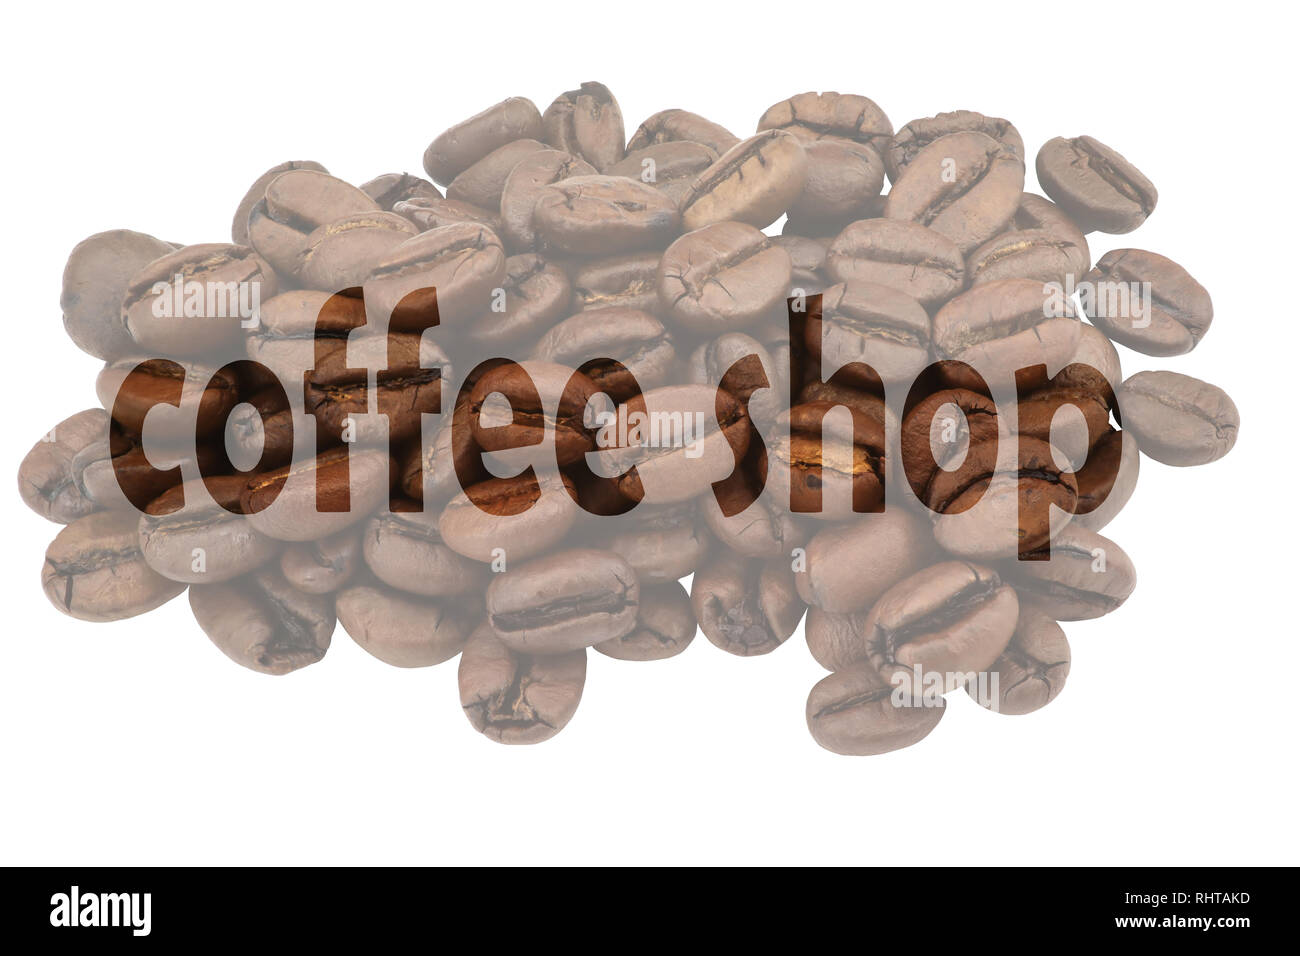 Image with highlighted text Coffee shop against pale background of coffee beans Stock Photo